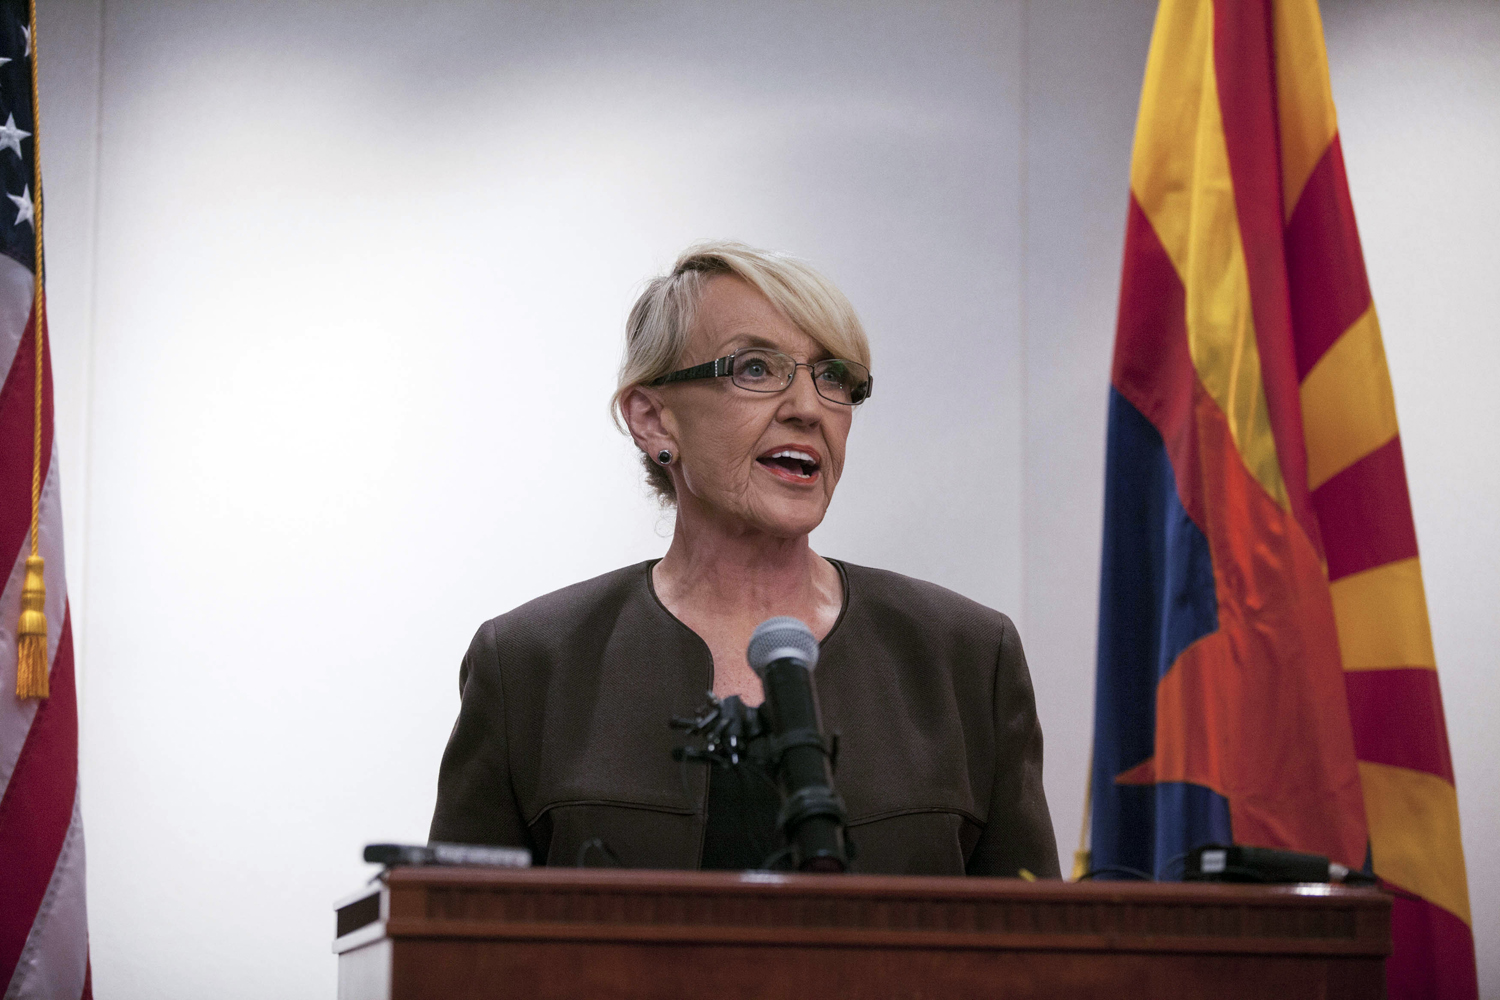 Arizona Governor Jan Brewer. On Tuesday, she signed a bill allowing snap inspections of the state's abortion clinics (Samantha Sais —Reuters)